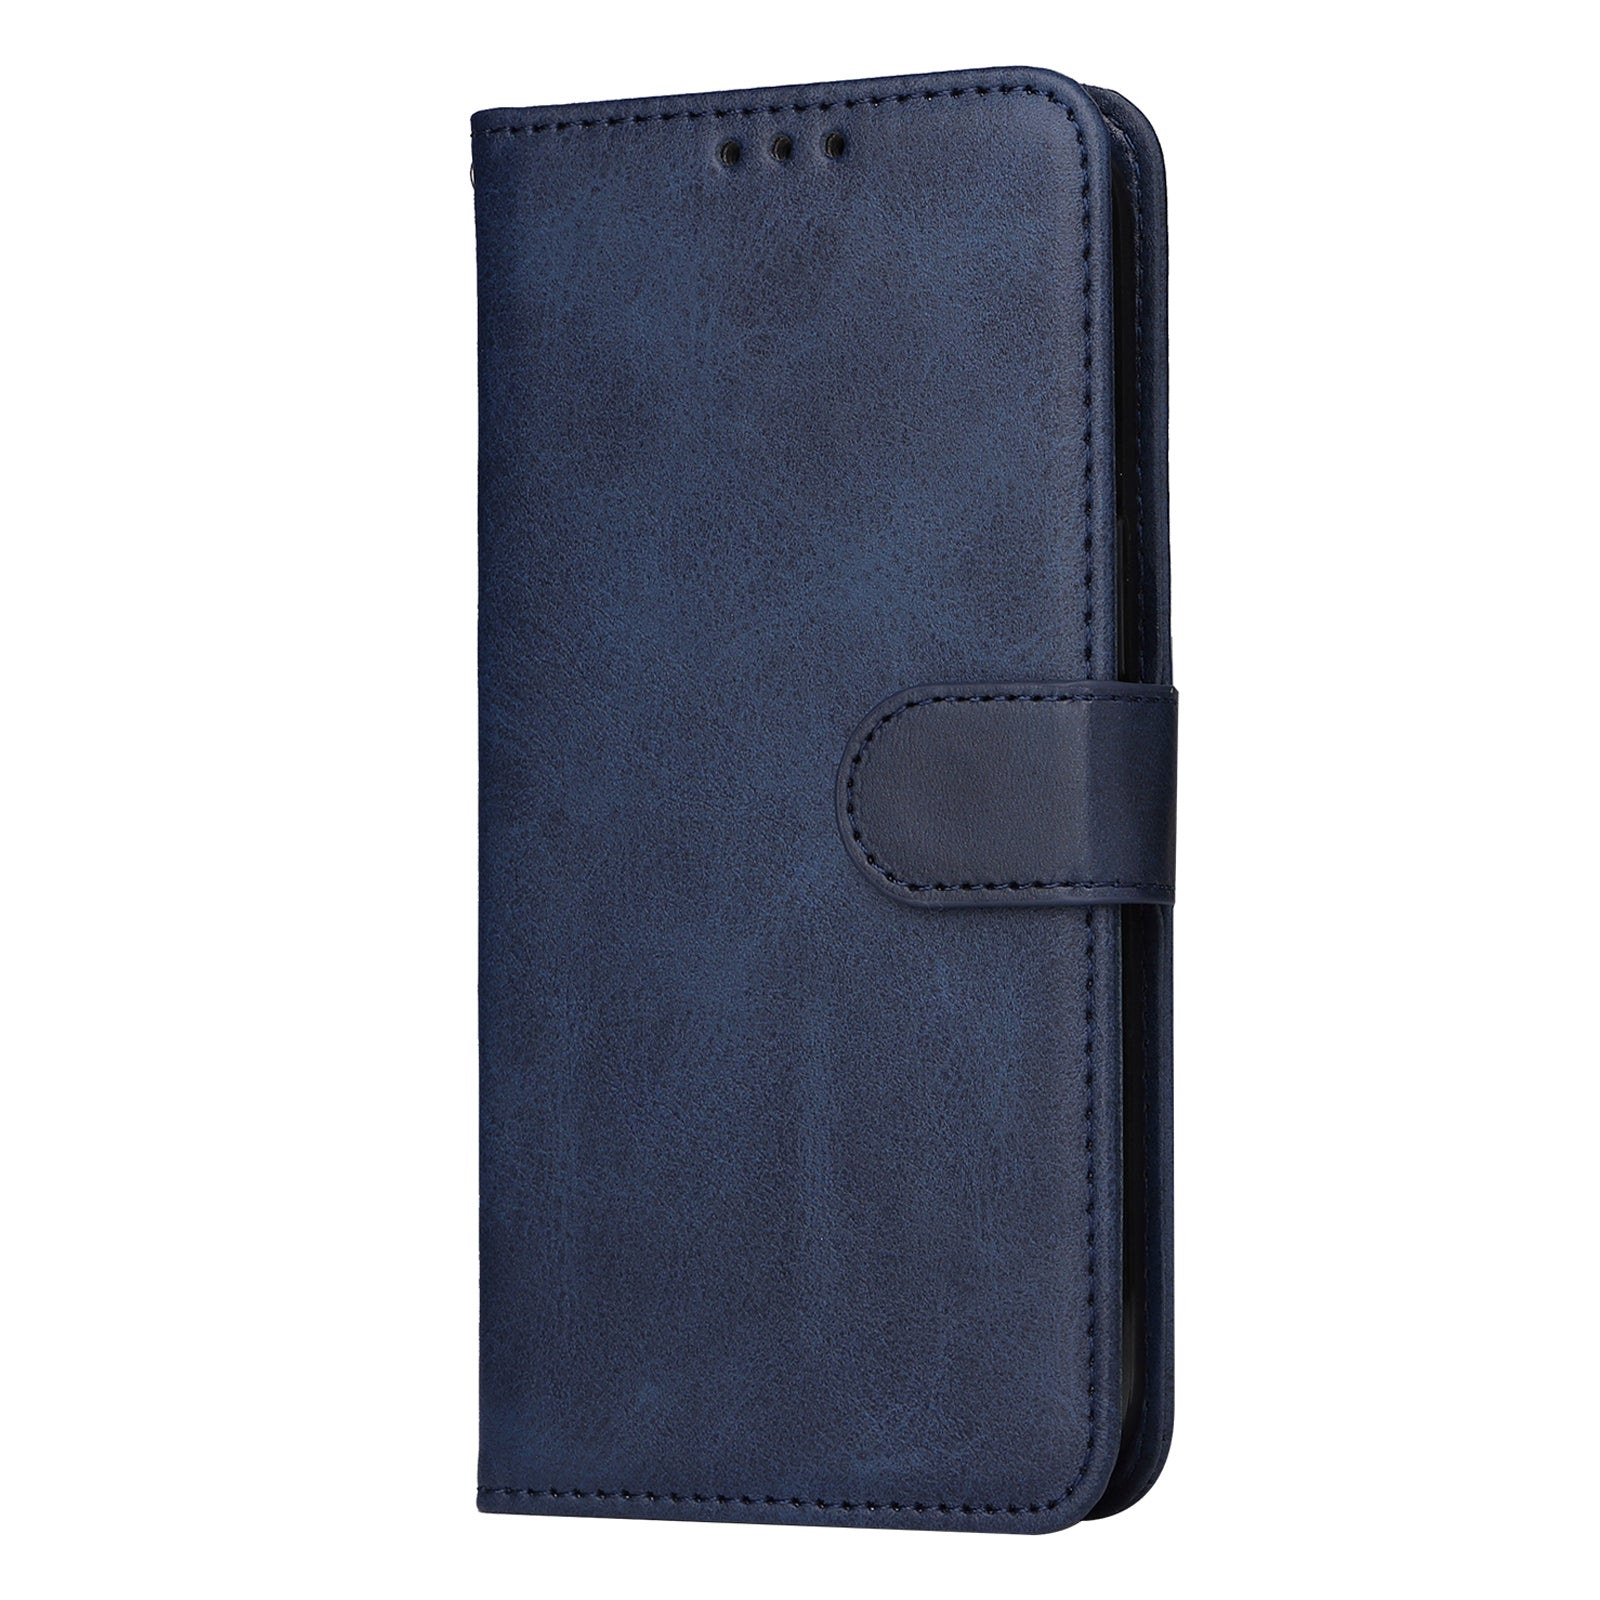 Premium Leather Wallet Case with Multiple Card Slots for iPhone